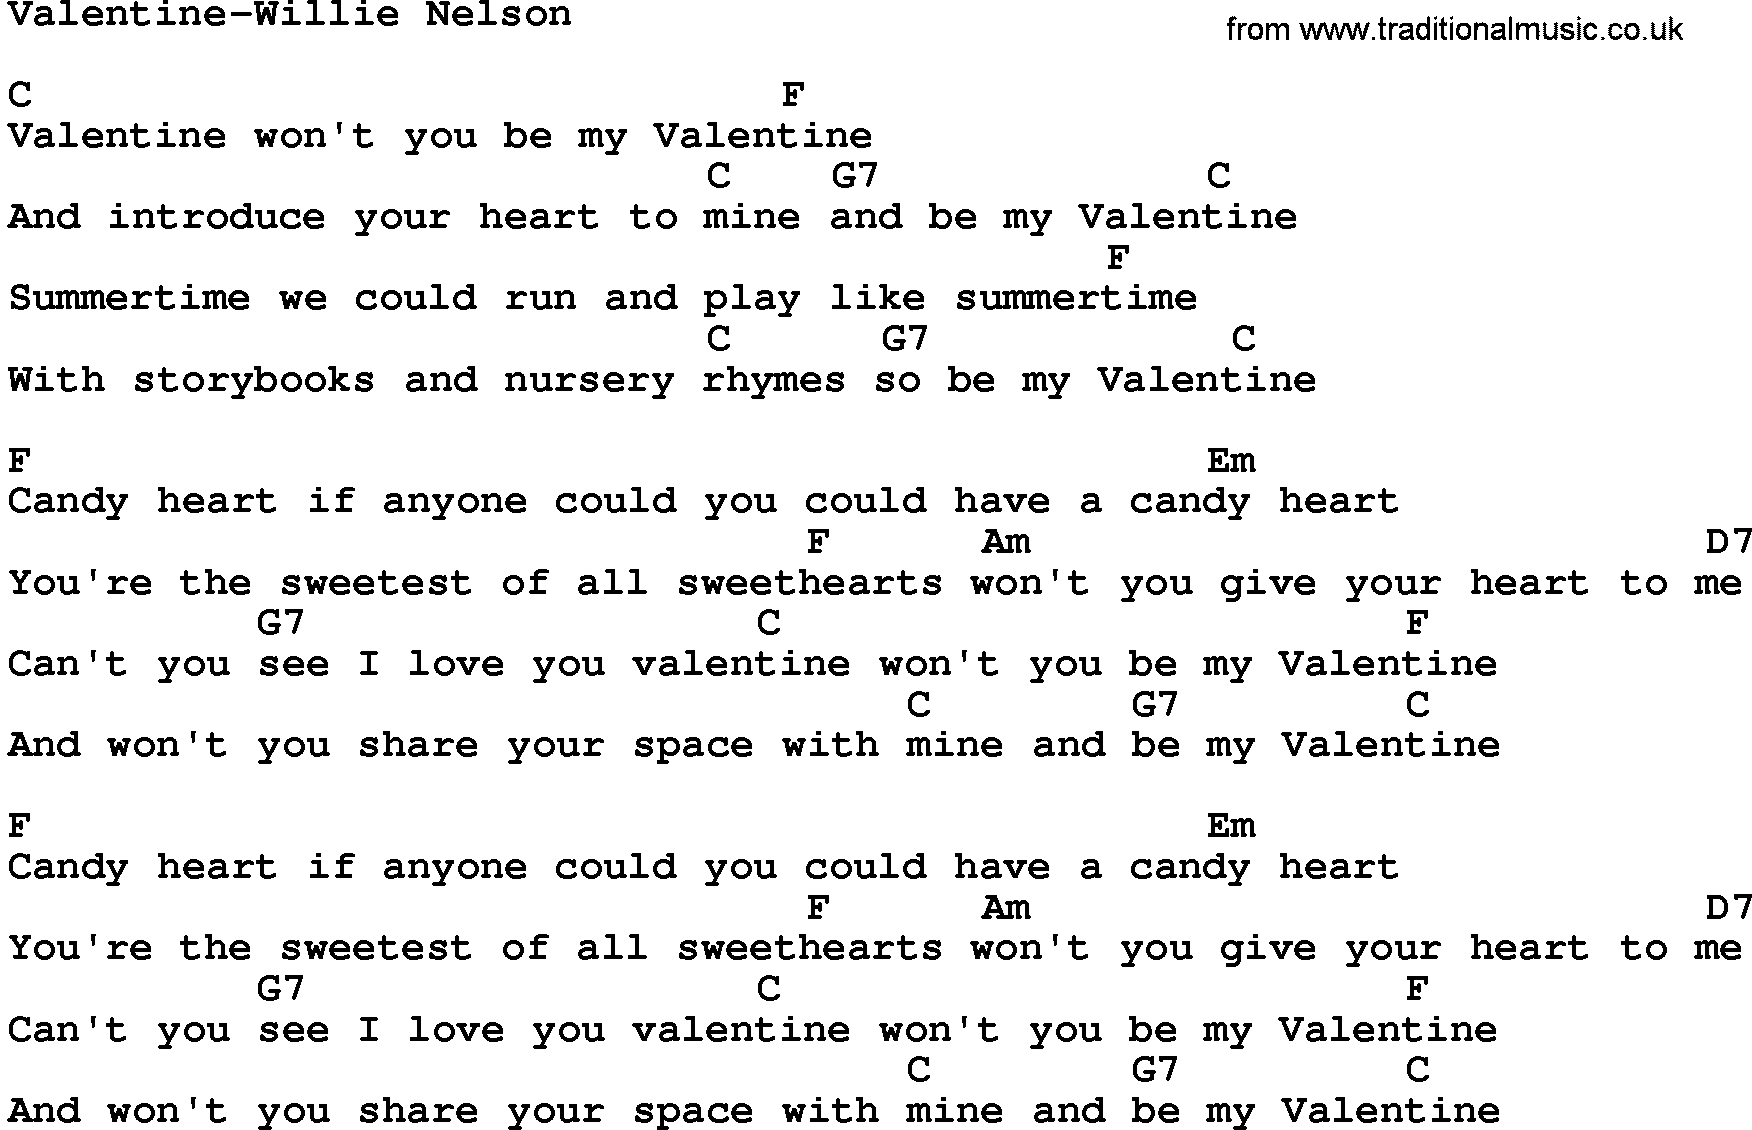 Country music song: Valentine-Willie Nelson lyrics and chords